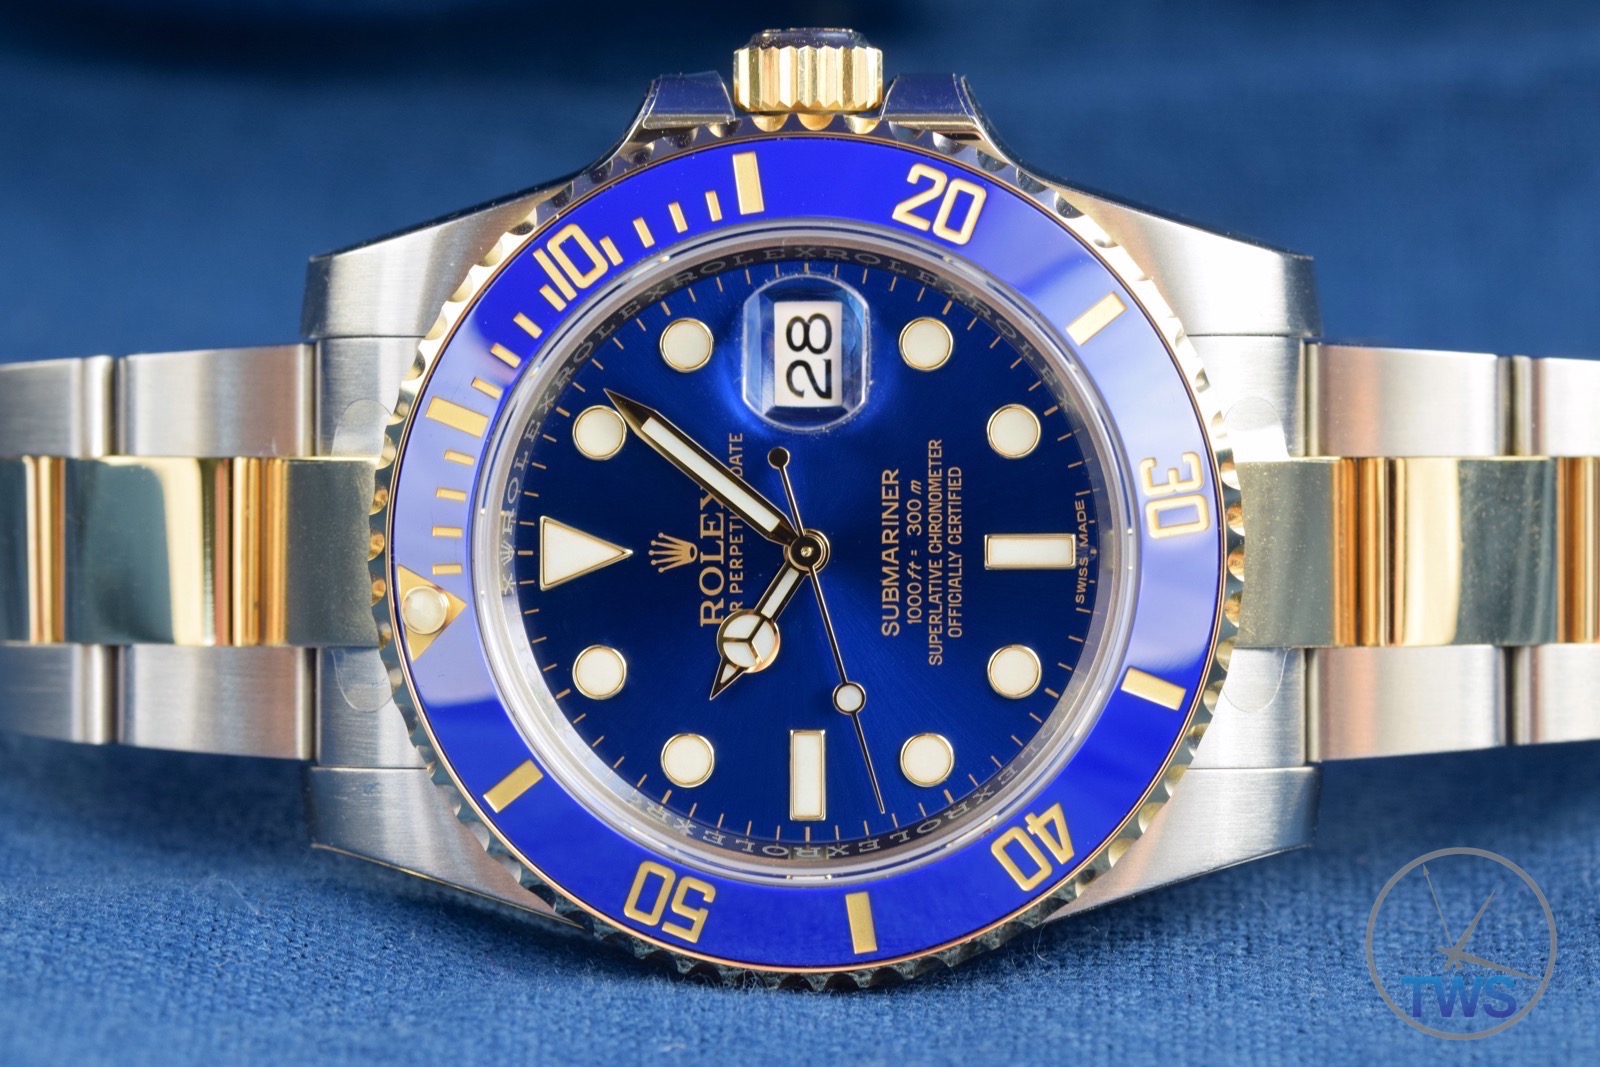 Rolex Submariner Date: Hands-On Review 